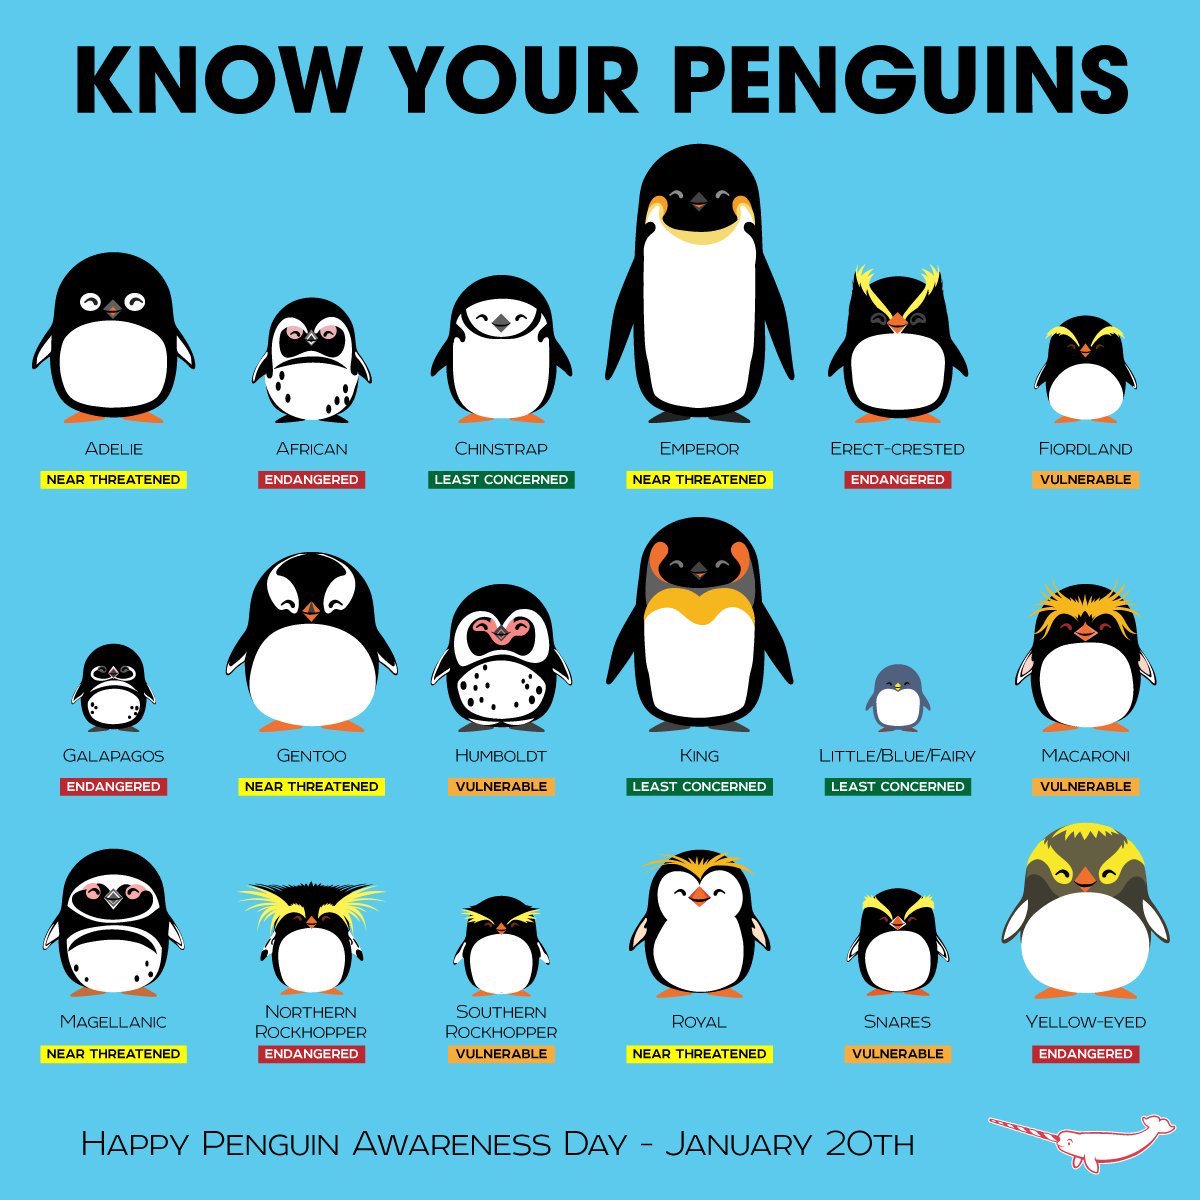 Know Your Penguins - From @Linux Tweeter feed